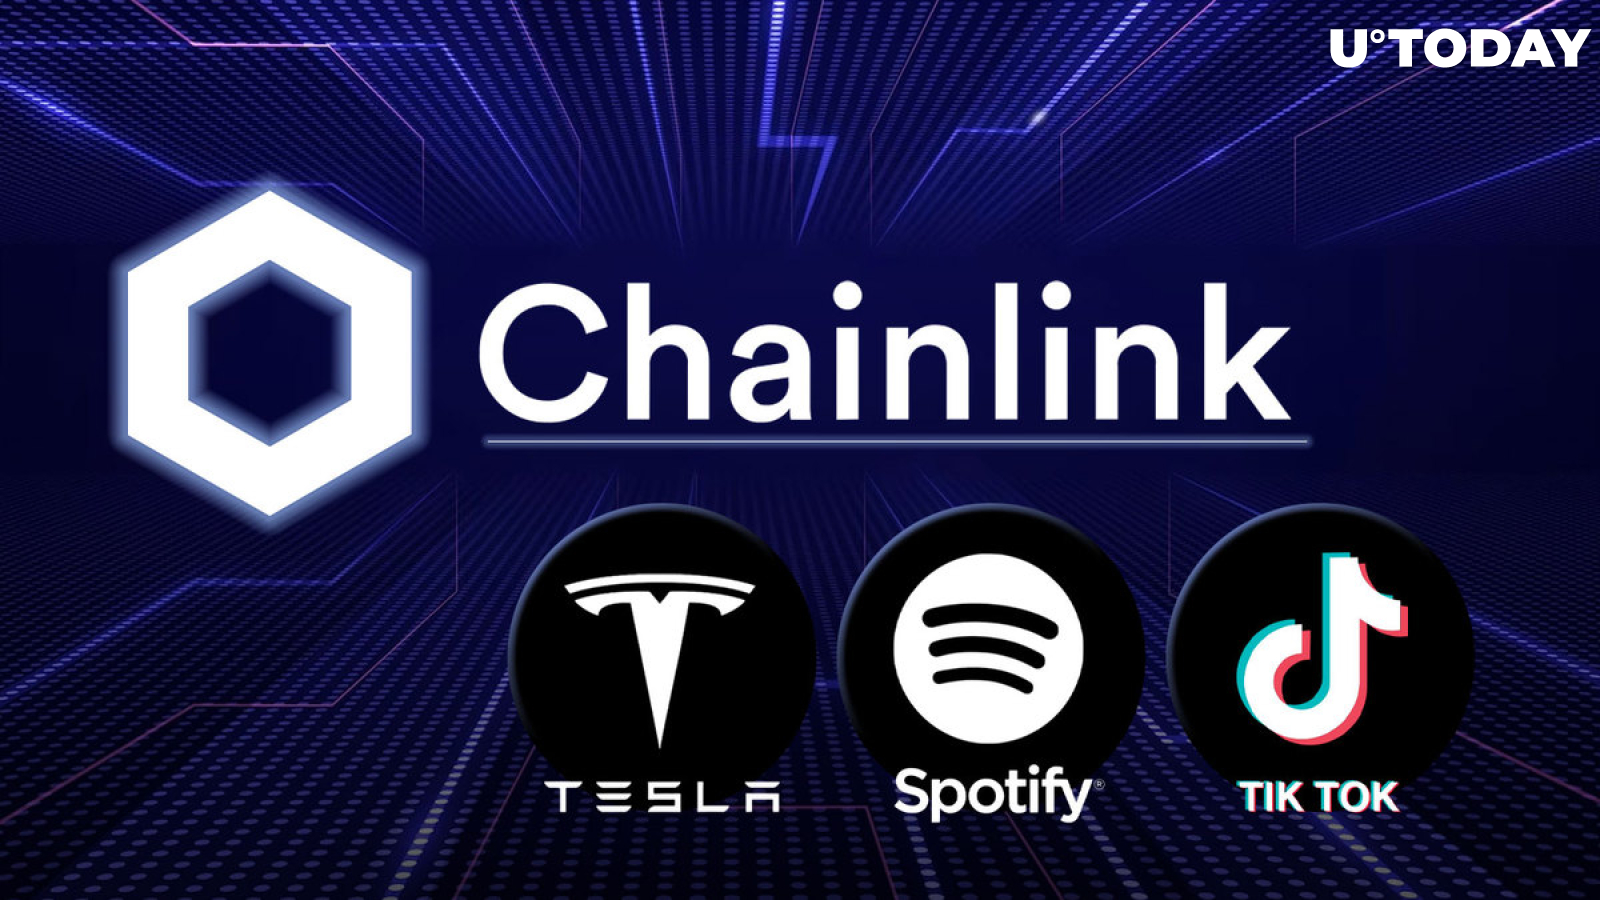 Tesla, Spotify and TikTok Can Benefit From This Chainlink (LINK) Release